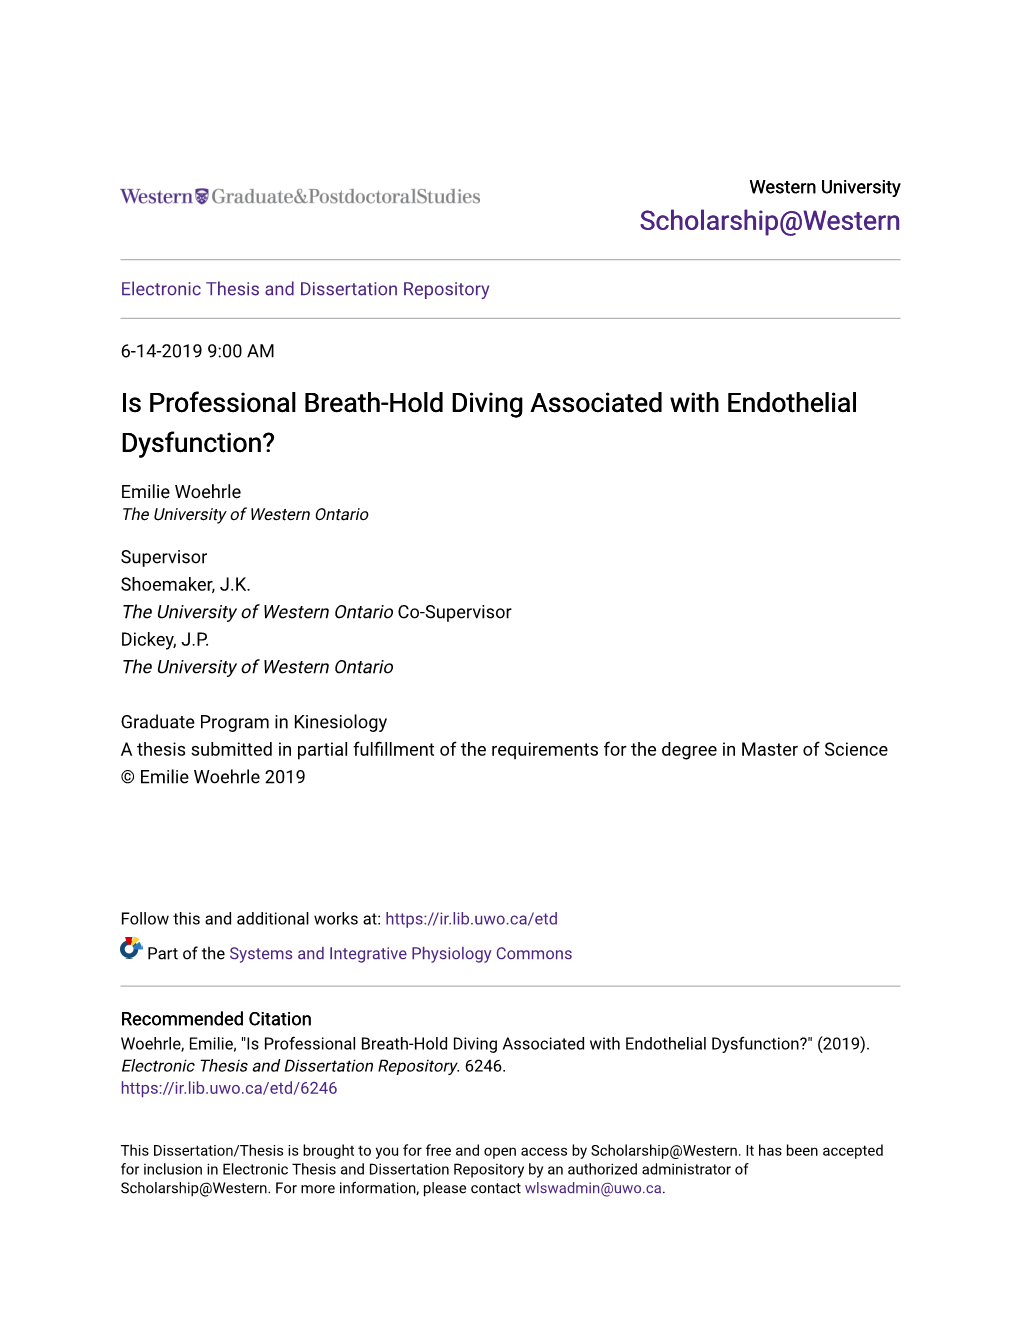 Is Professional Breath-Hold Diving Associated with Endothelial Dysfunction?